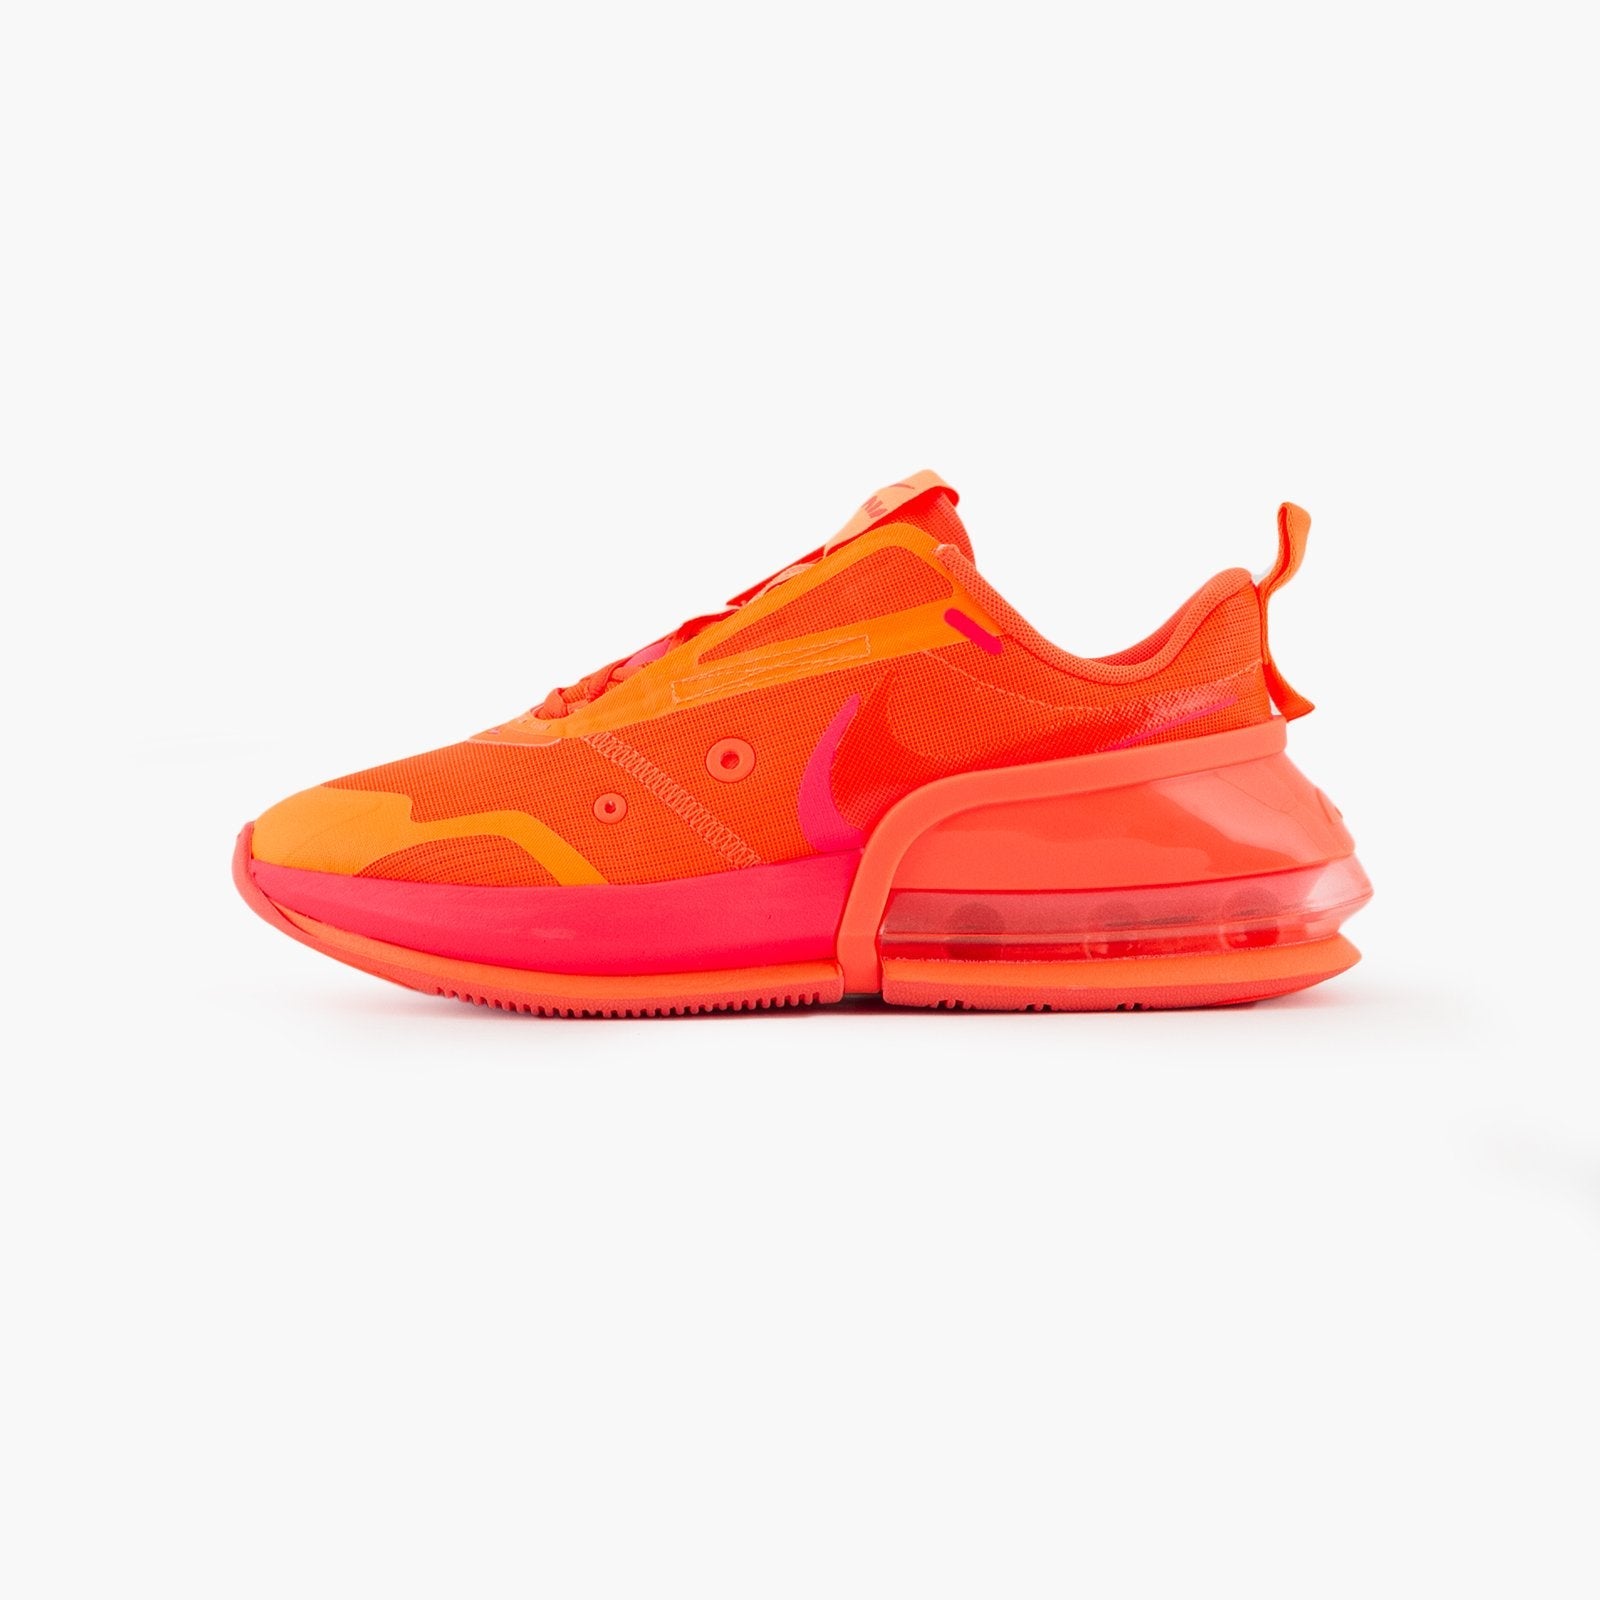 Nike Air Max UP NRG Women’s-CK4124-800
-Orange-11 us-SUEDE Store